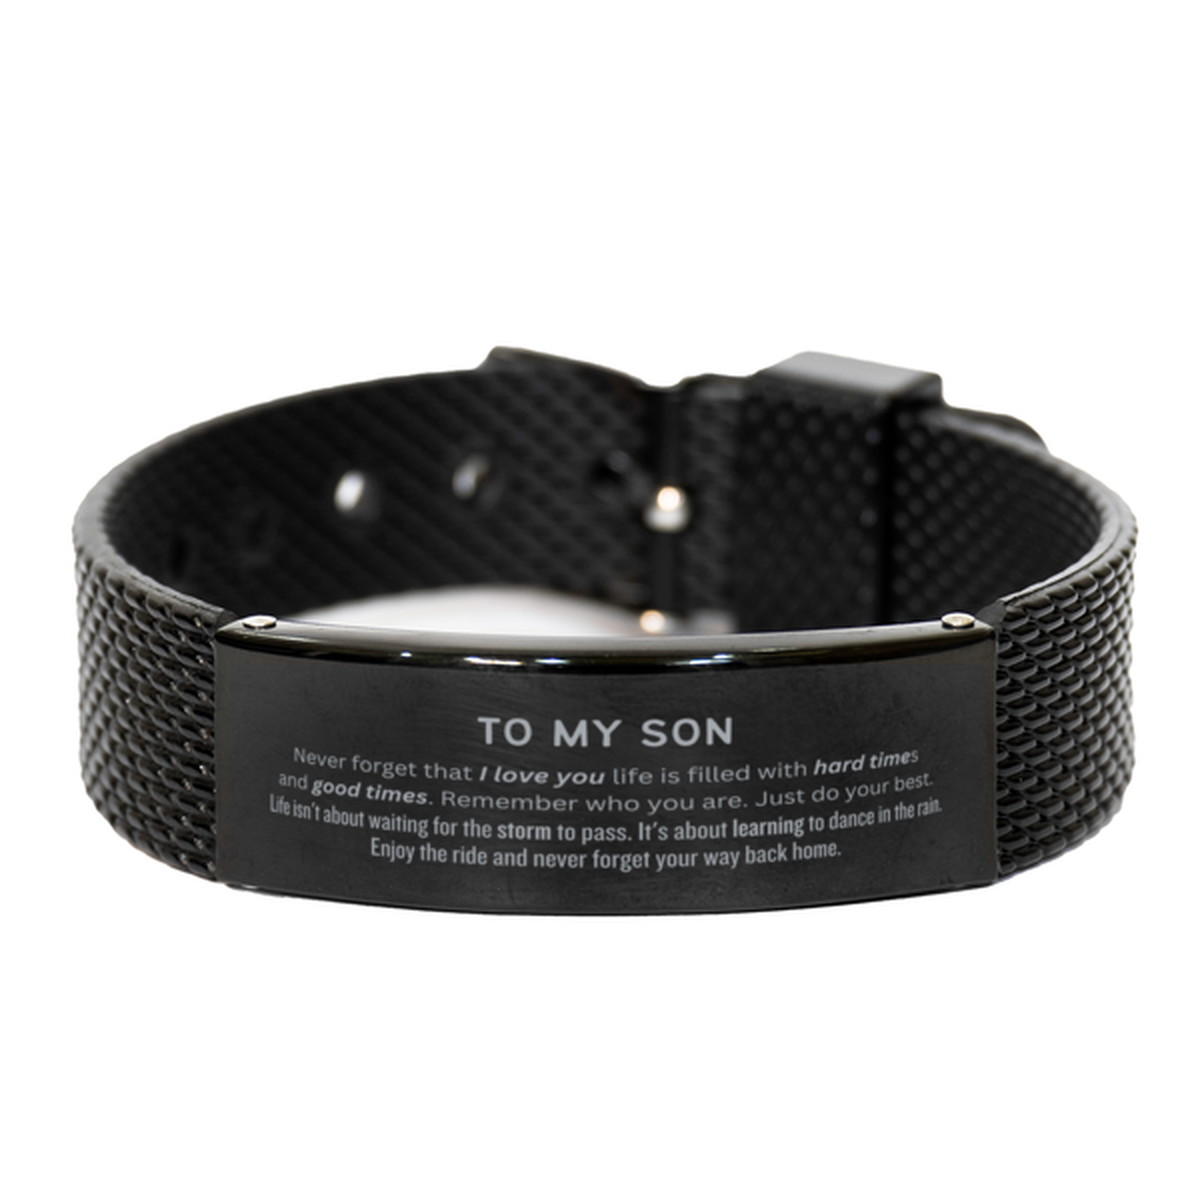 Christmas Son Black Shark Mesh Bracelet Gifts, To My Son Birthday Thank You Gifts For Son, Graduation Unique Gifts For Son To My Son Never forget that I love you life is filled with hard times and good times. Remember who you are. Just do your best